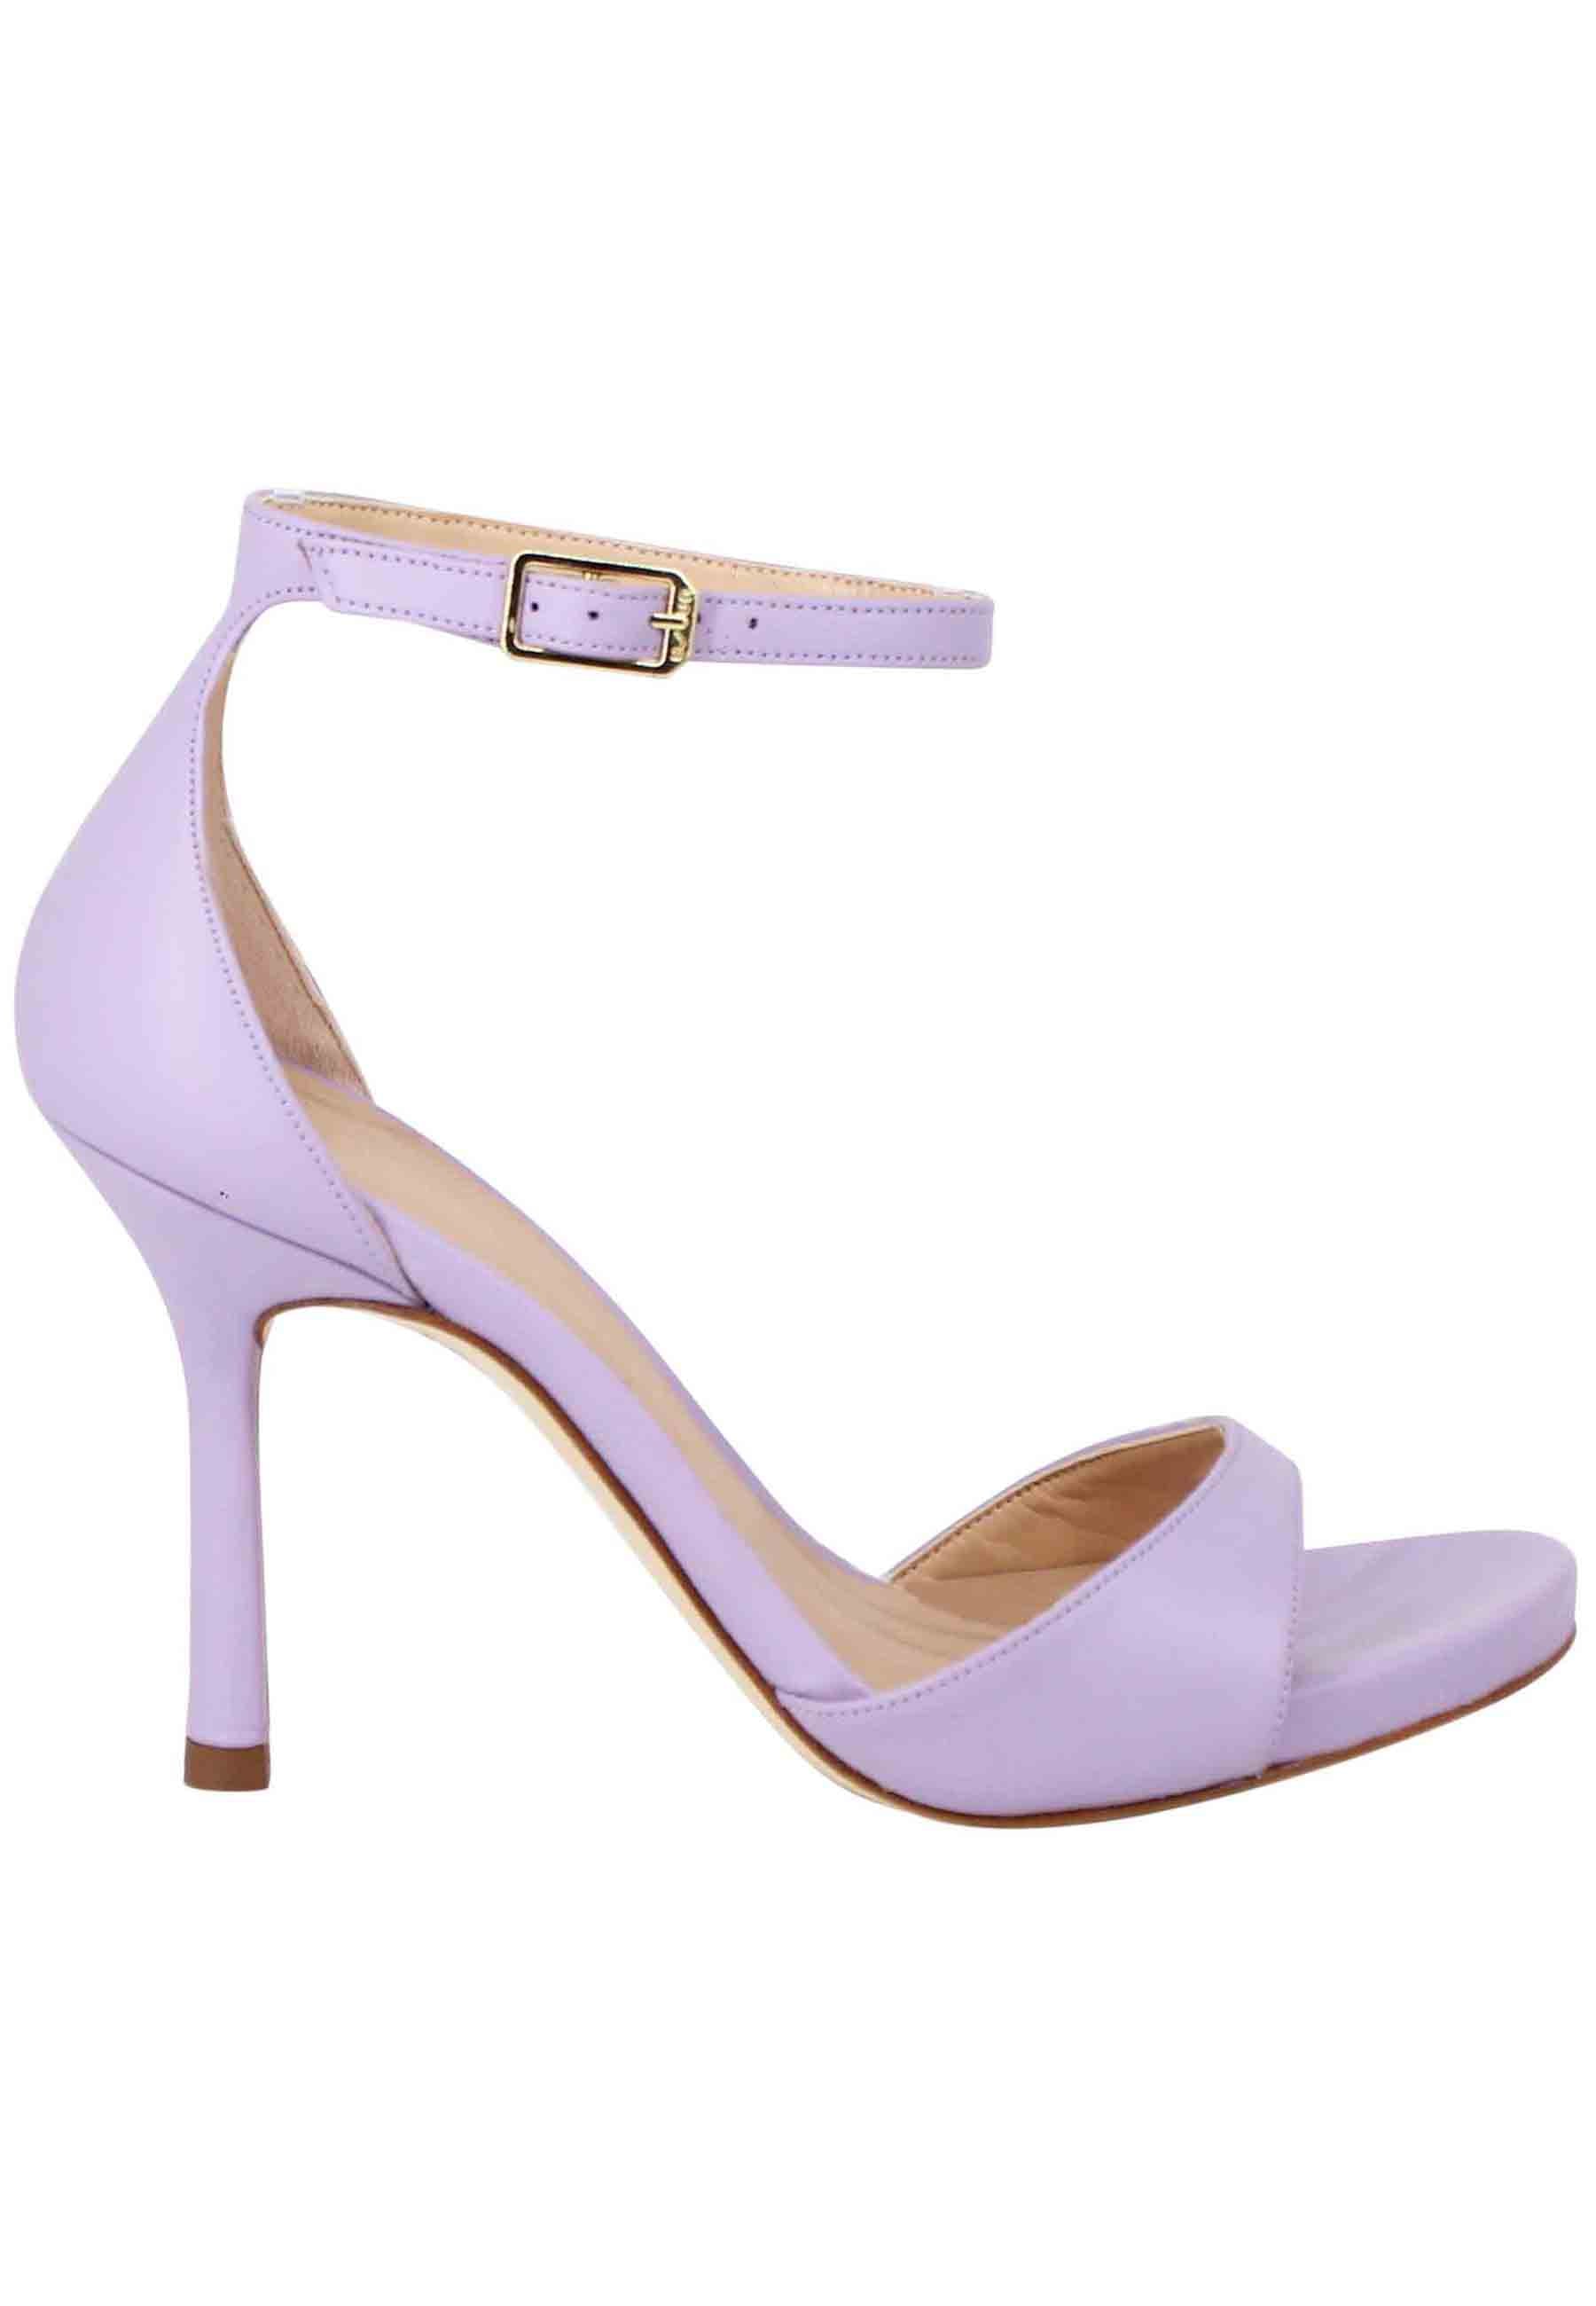 Women's lilac leather sandals with high heel and ankle strap